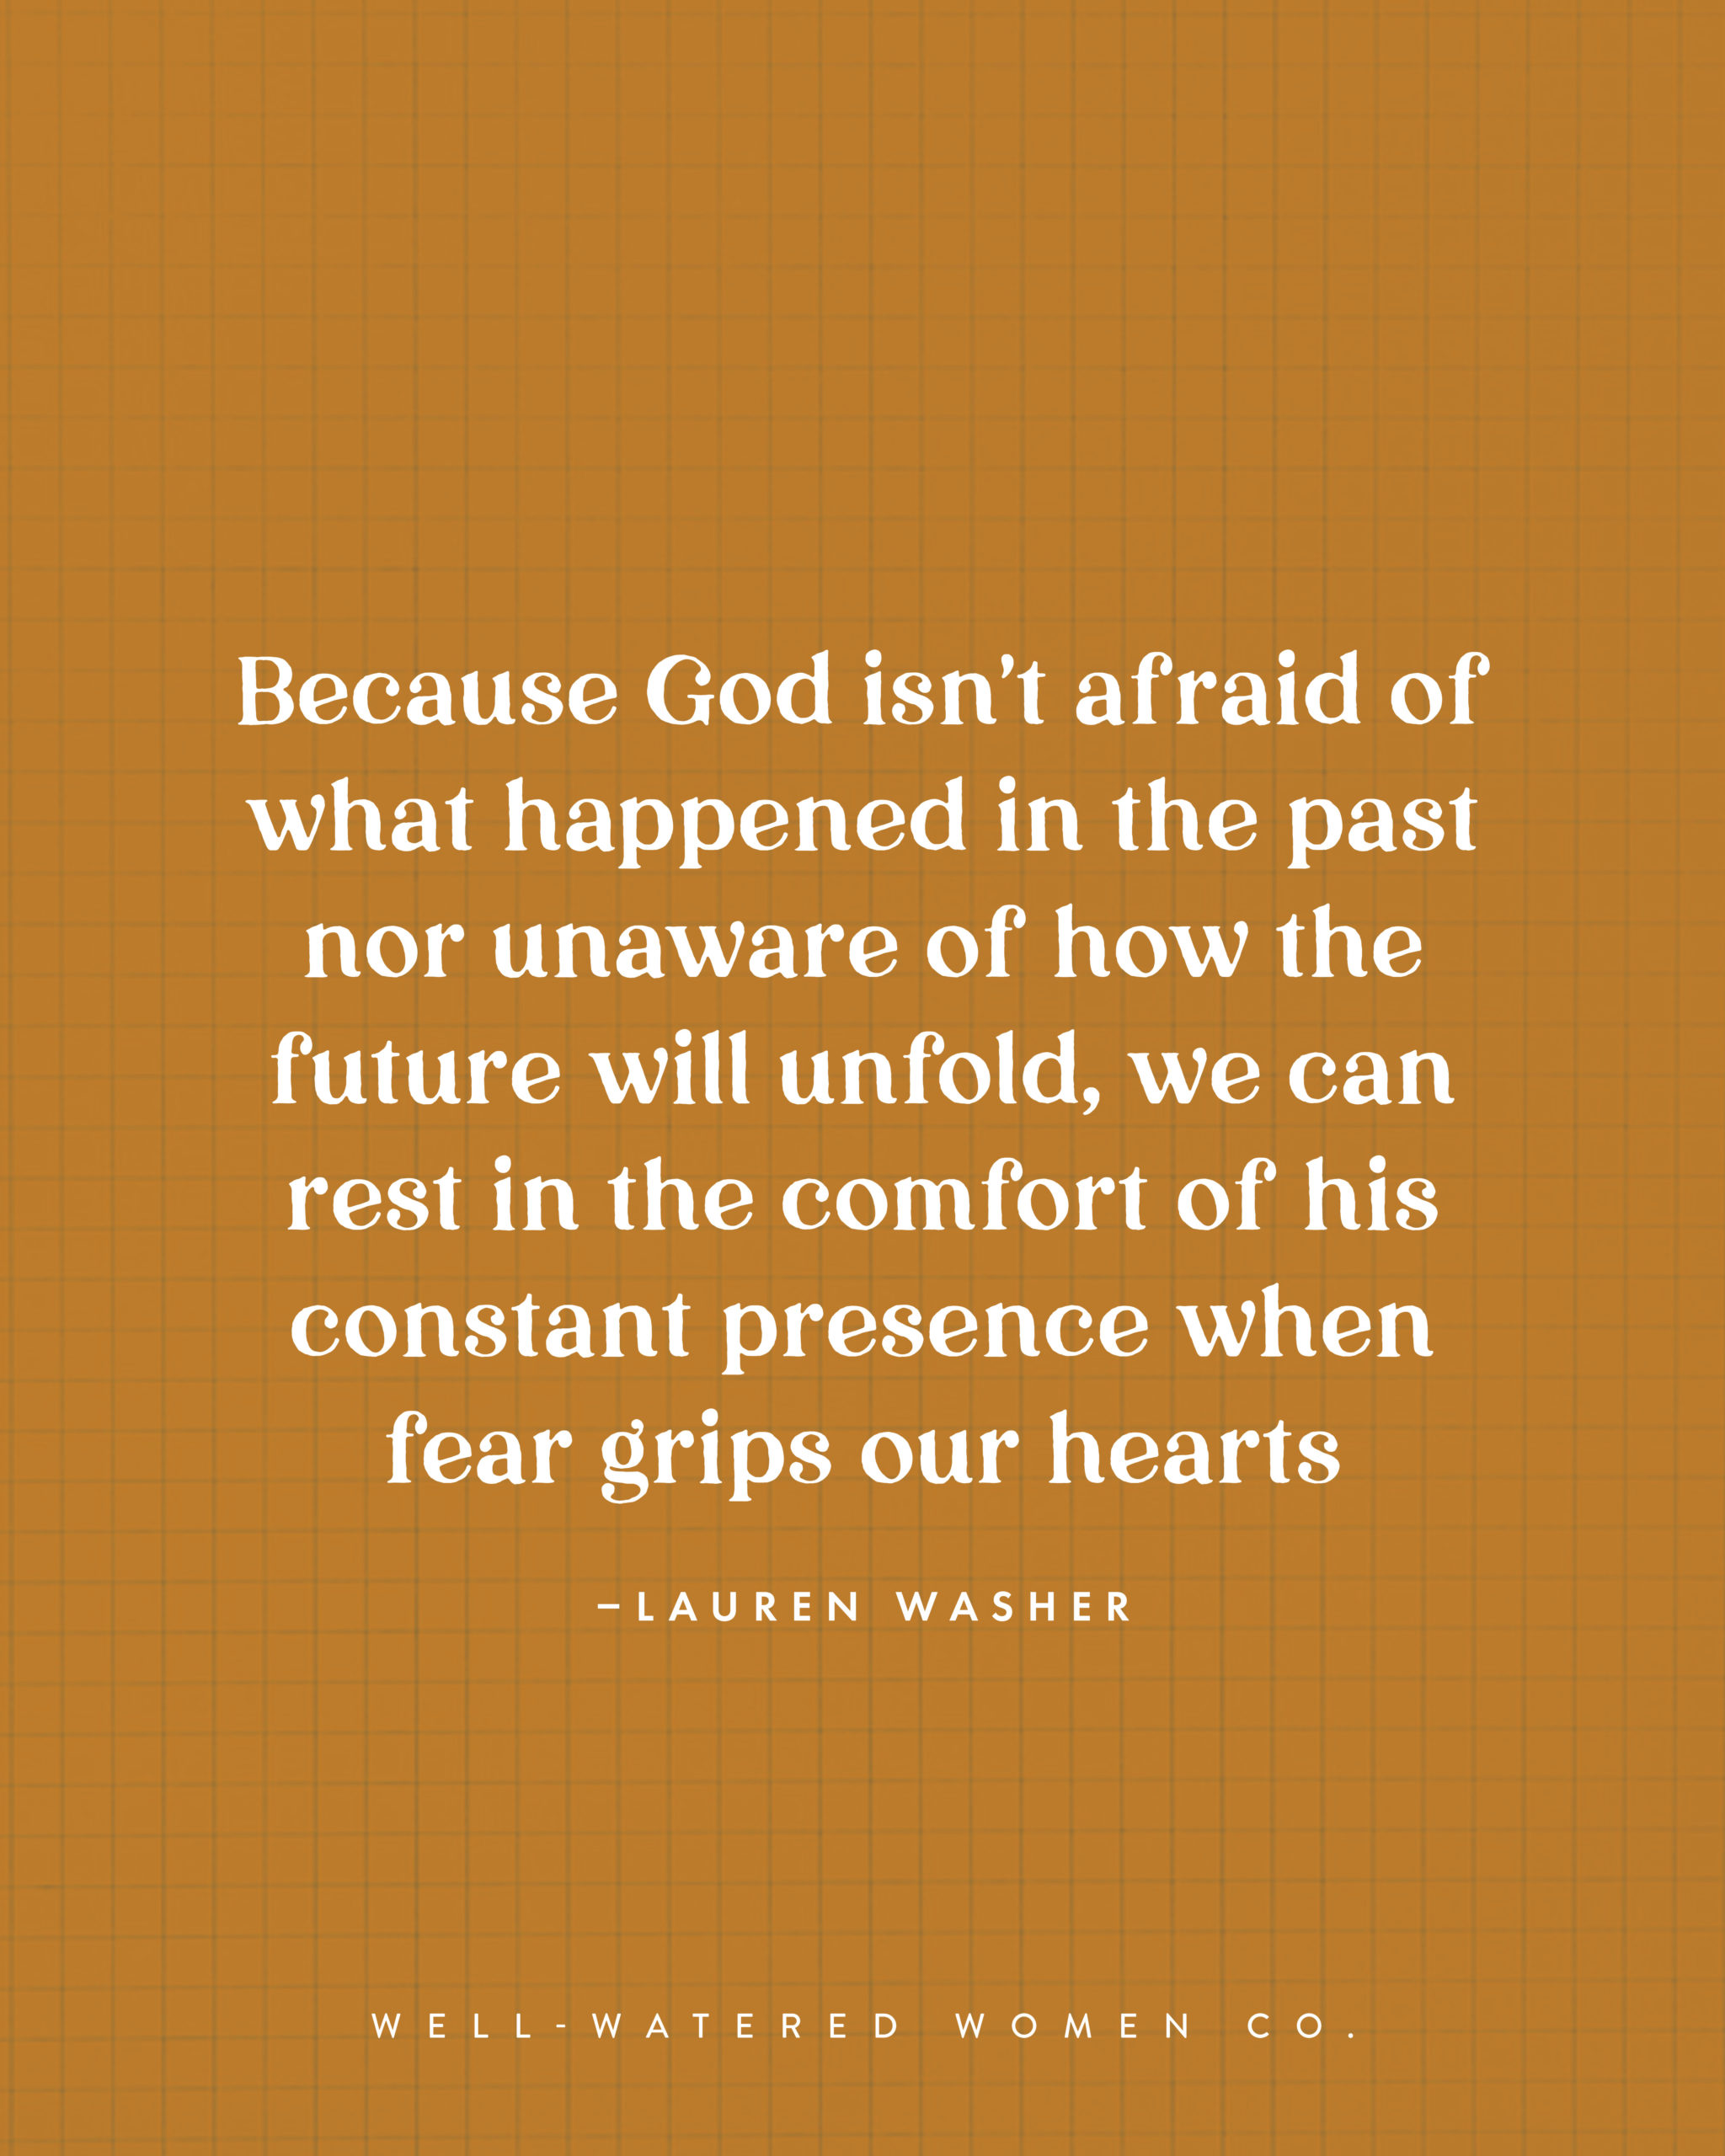 God's Faithfulness in My Fear - an article by Well-Watered Women - quote